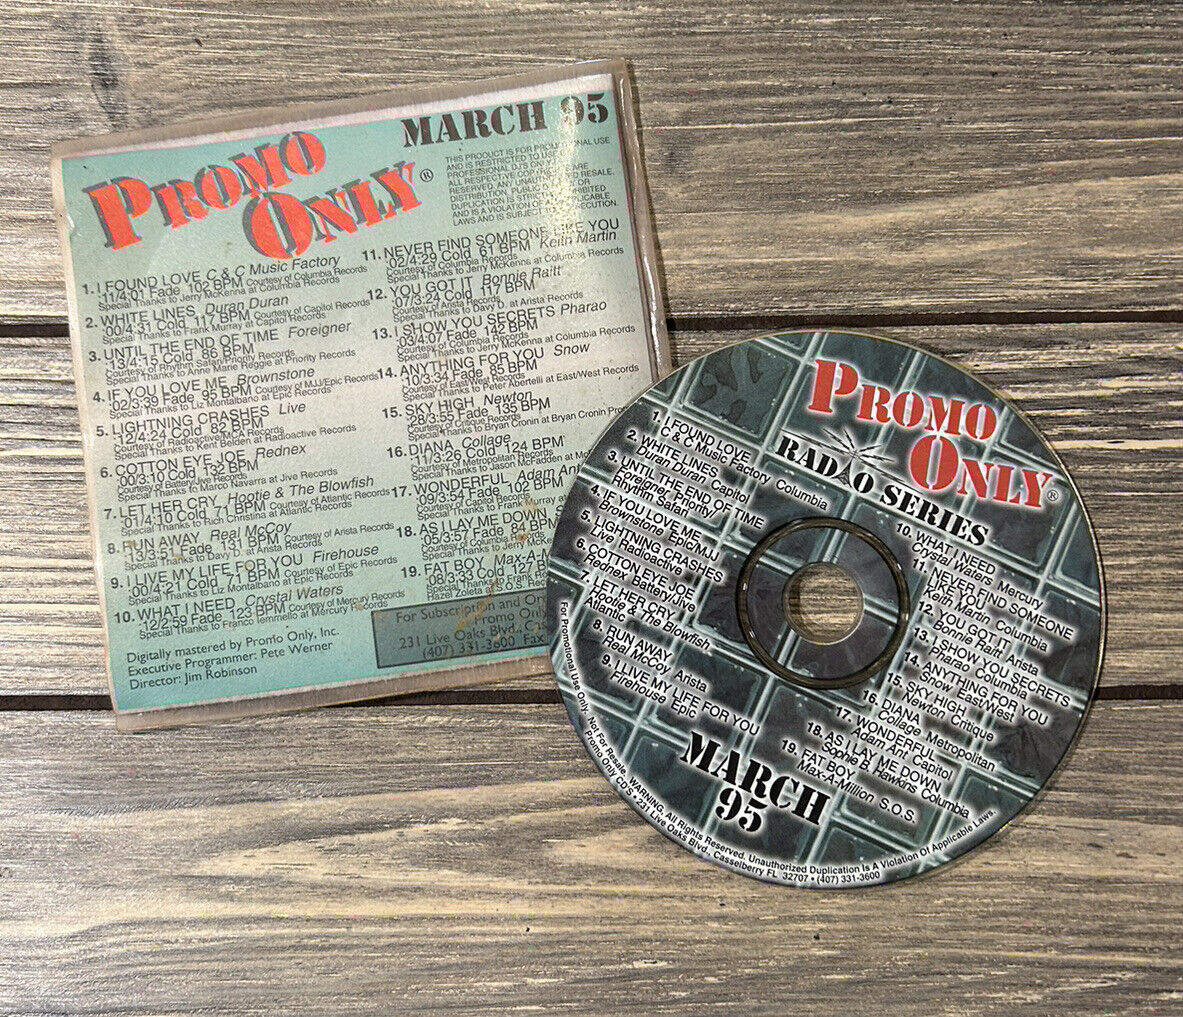 Vintage March 1995 Promo Only CD Promotional Radio Series